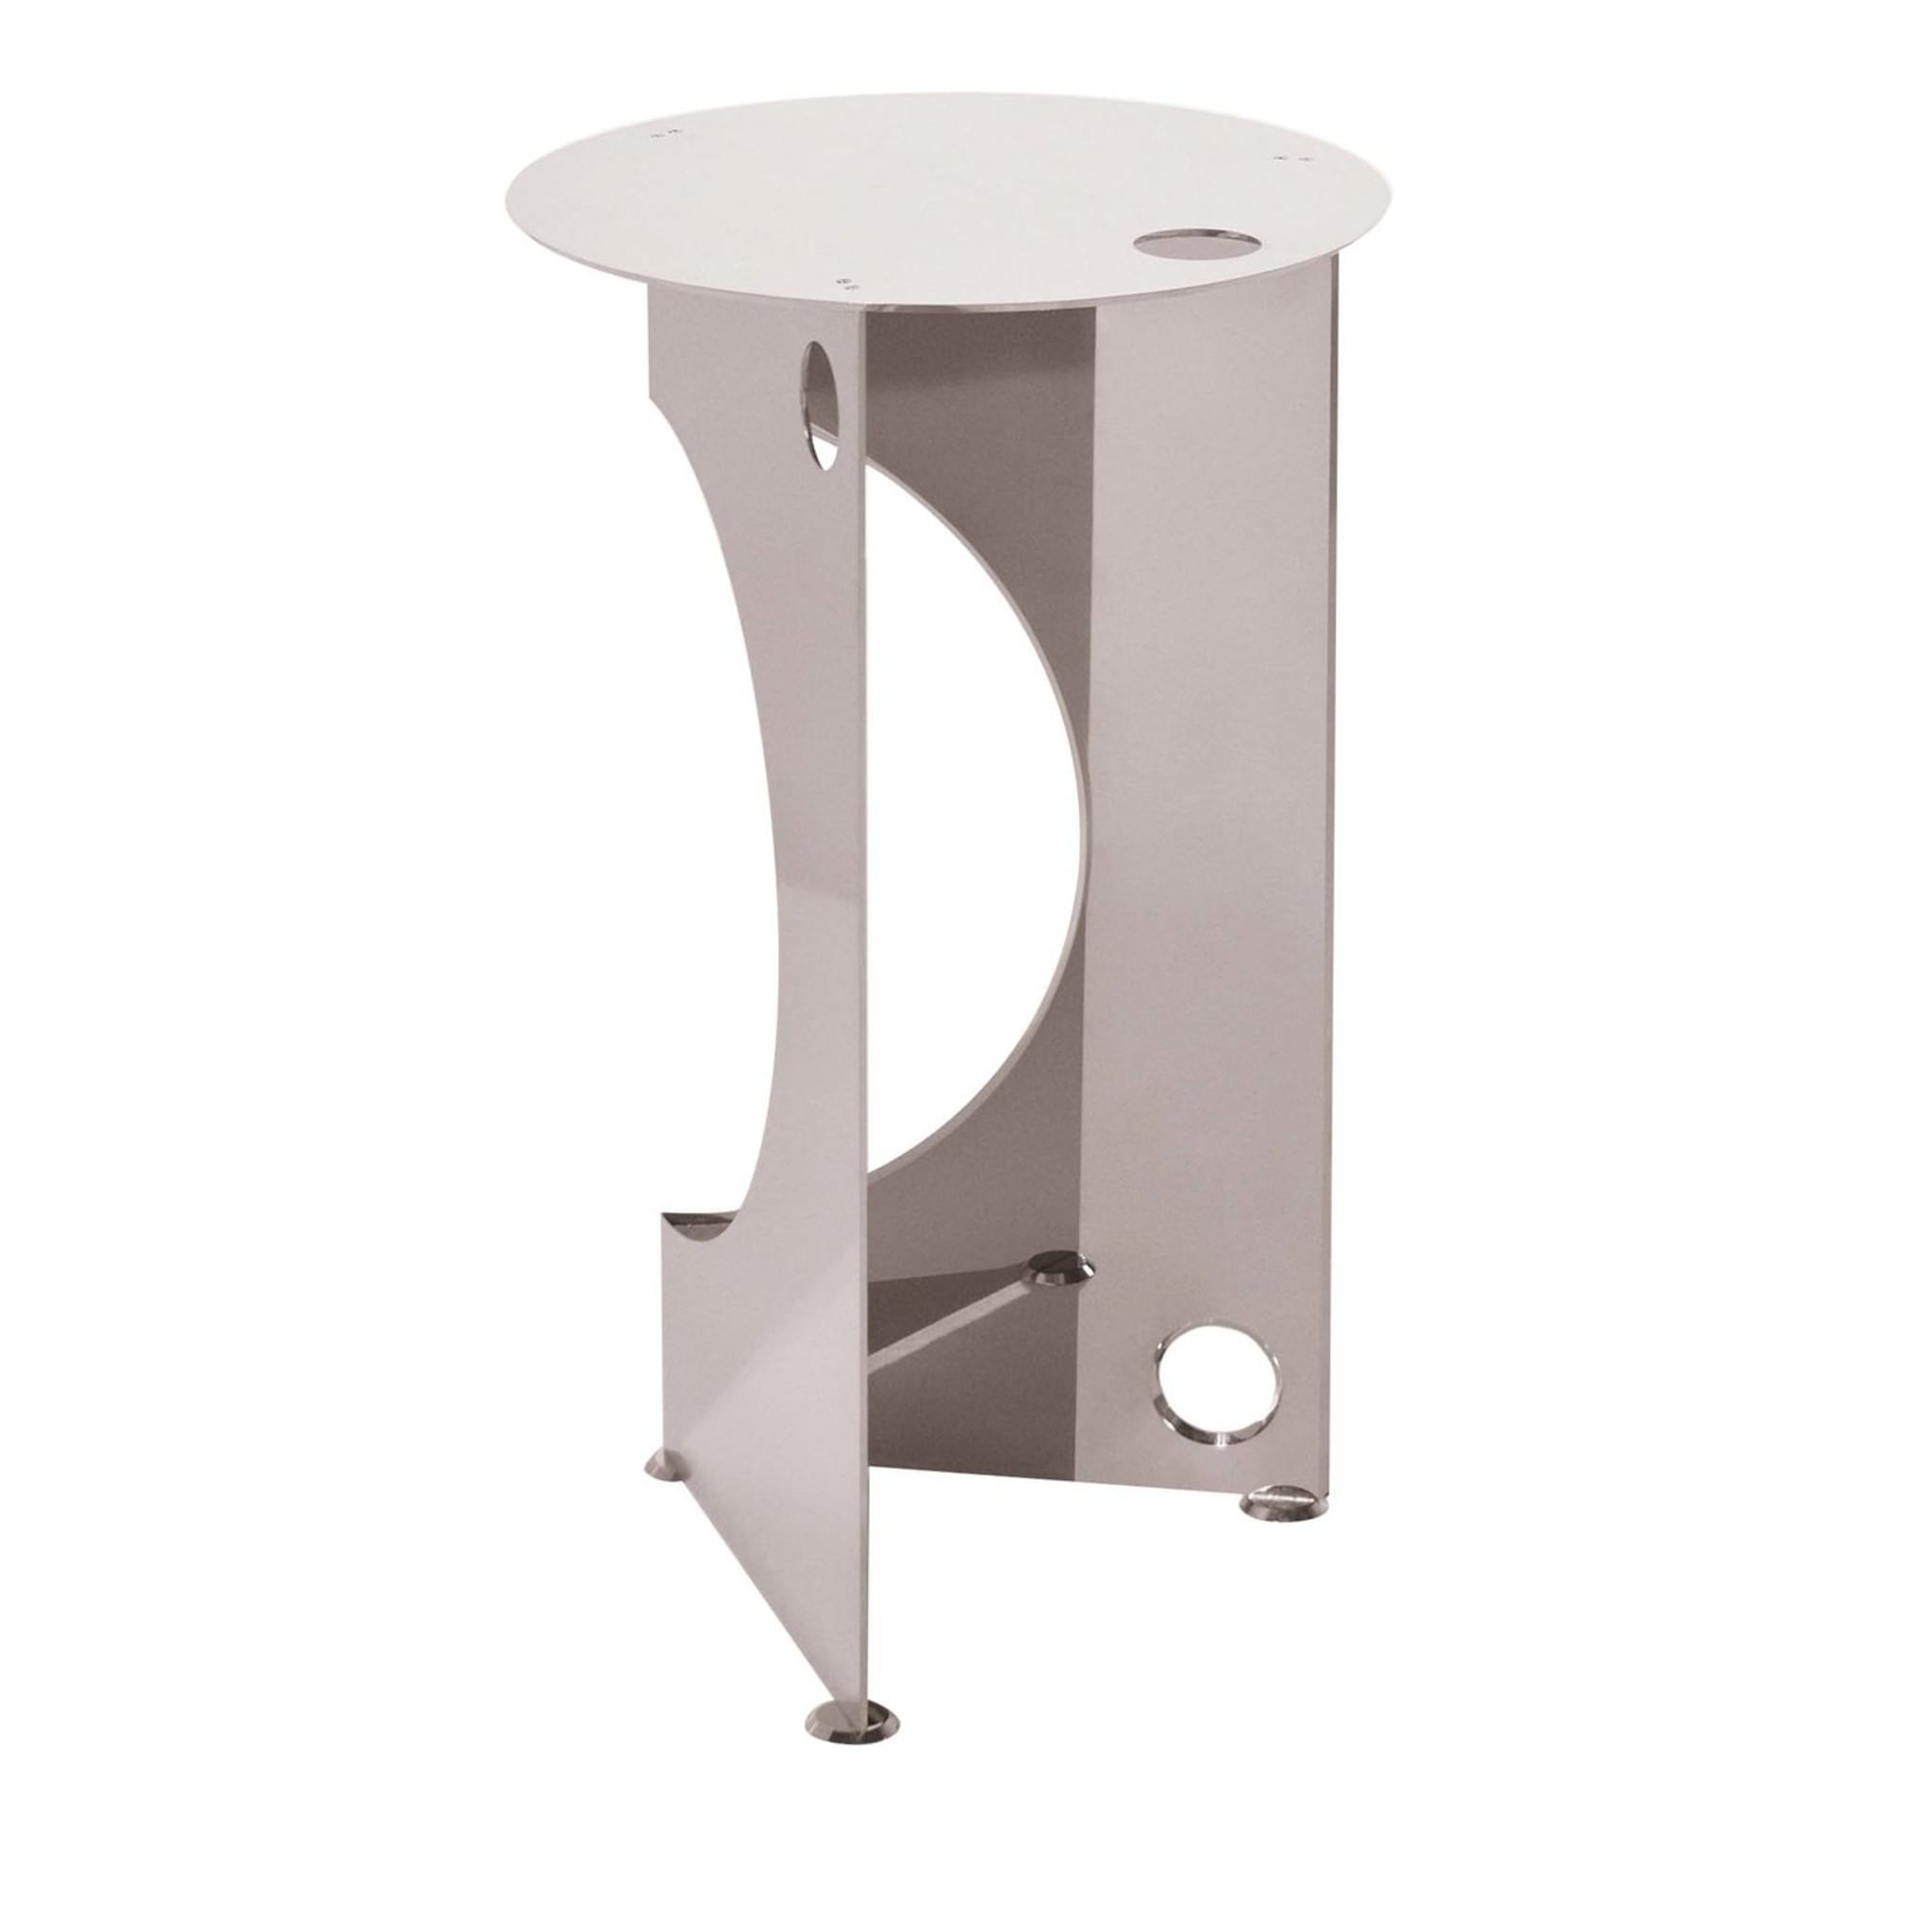 One Side Table in Polished Aluminium - Main view